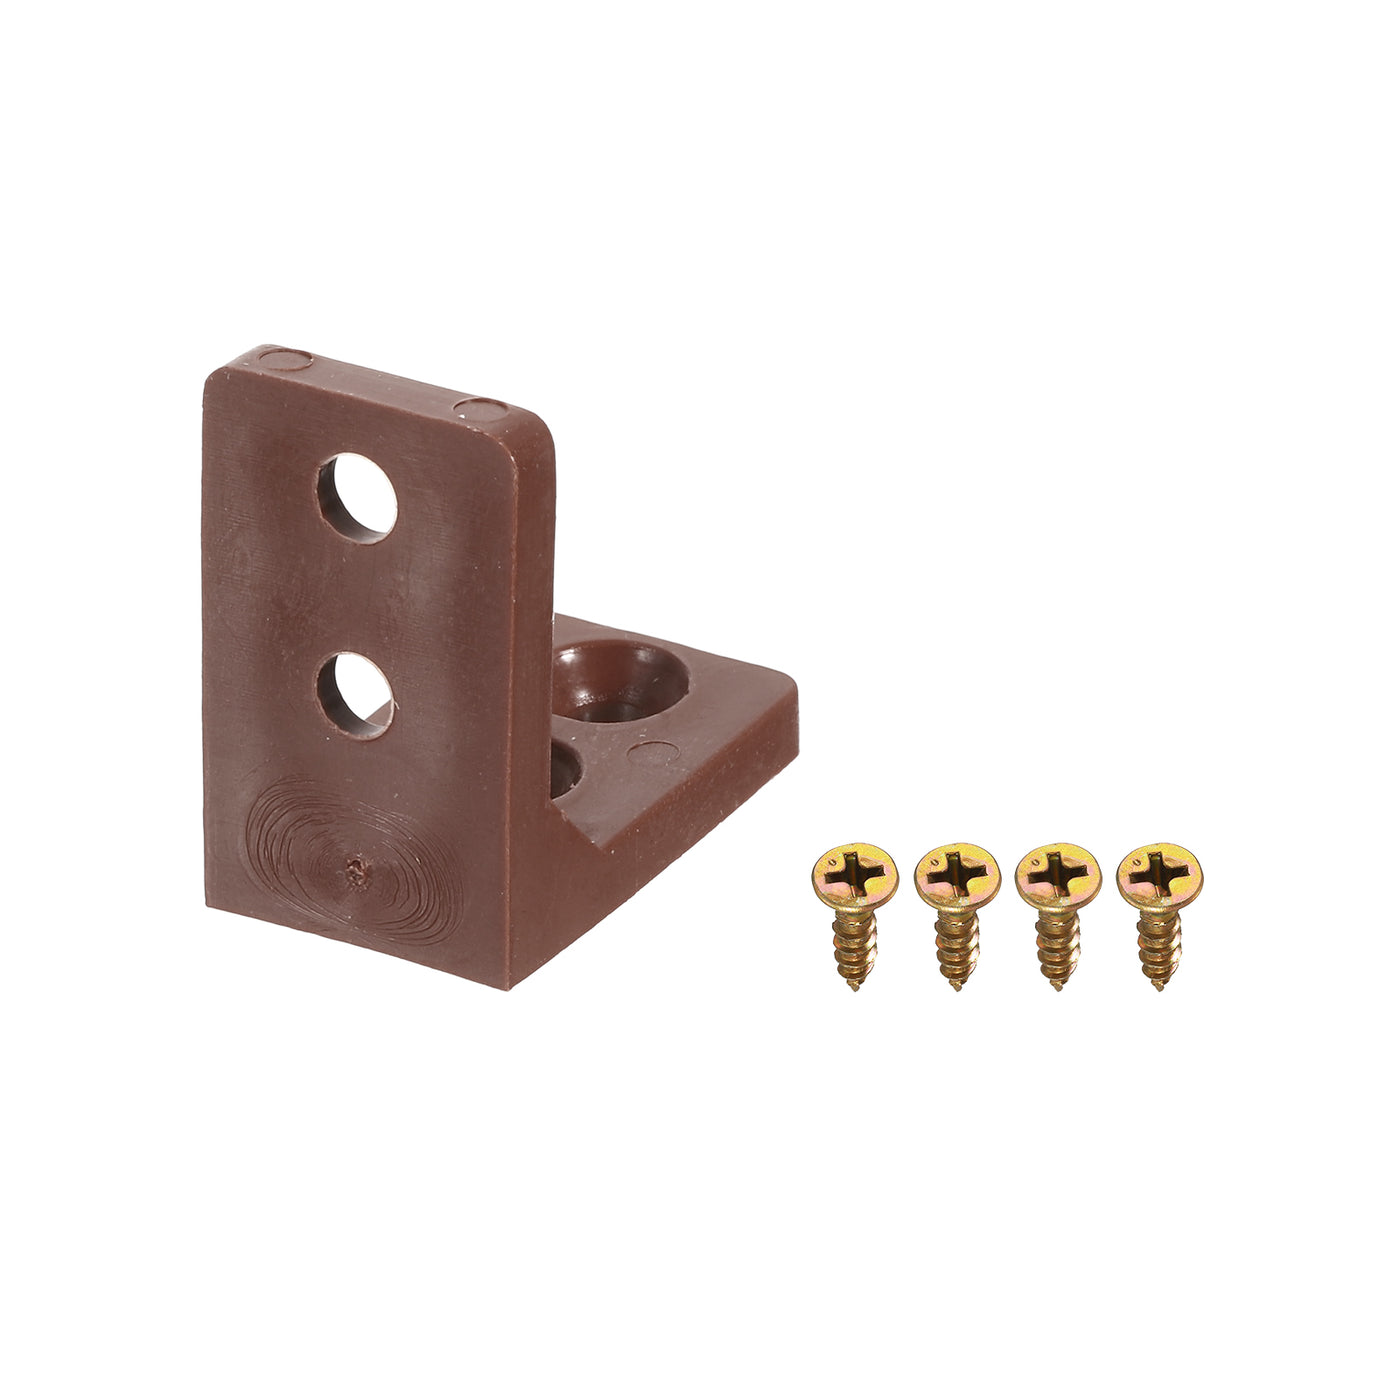 uxcell Uxcell 50Pcs 90 Degree Plastic Corner Braces, 16.5x27x27mm Nylon Shelf Right Angle Brackets with Screws for Cabinets, Cupboards (Brown)